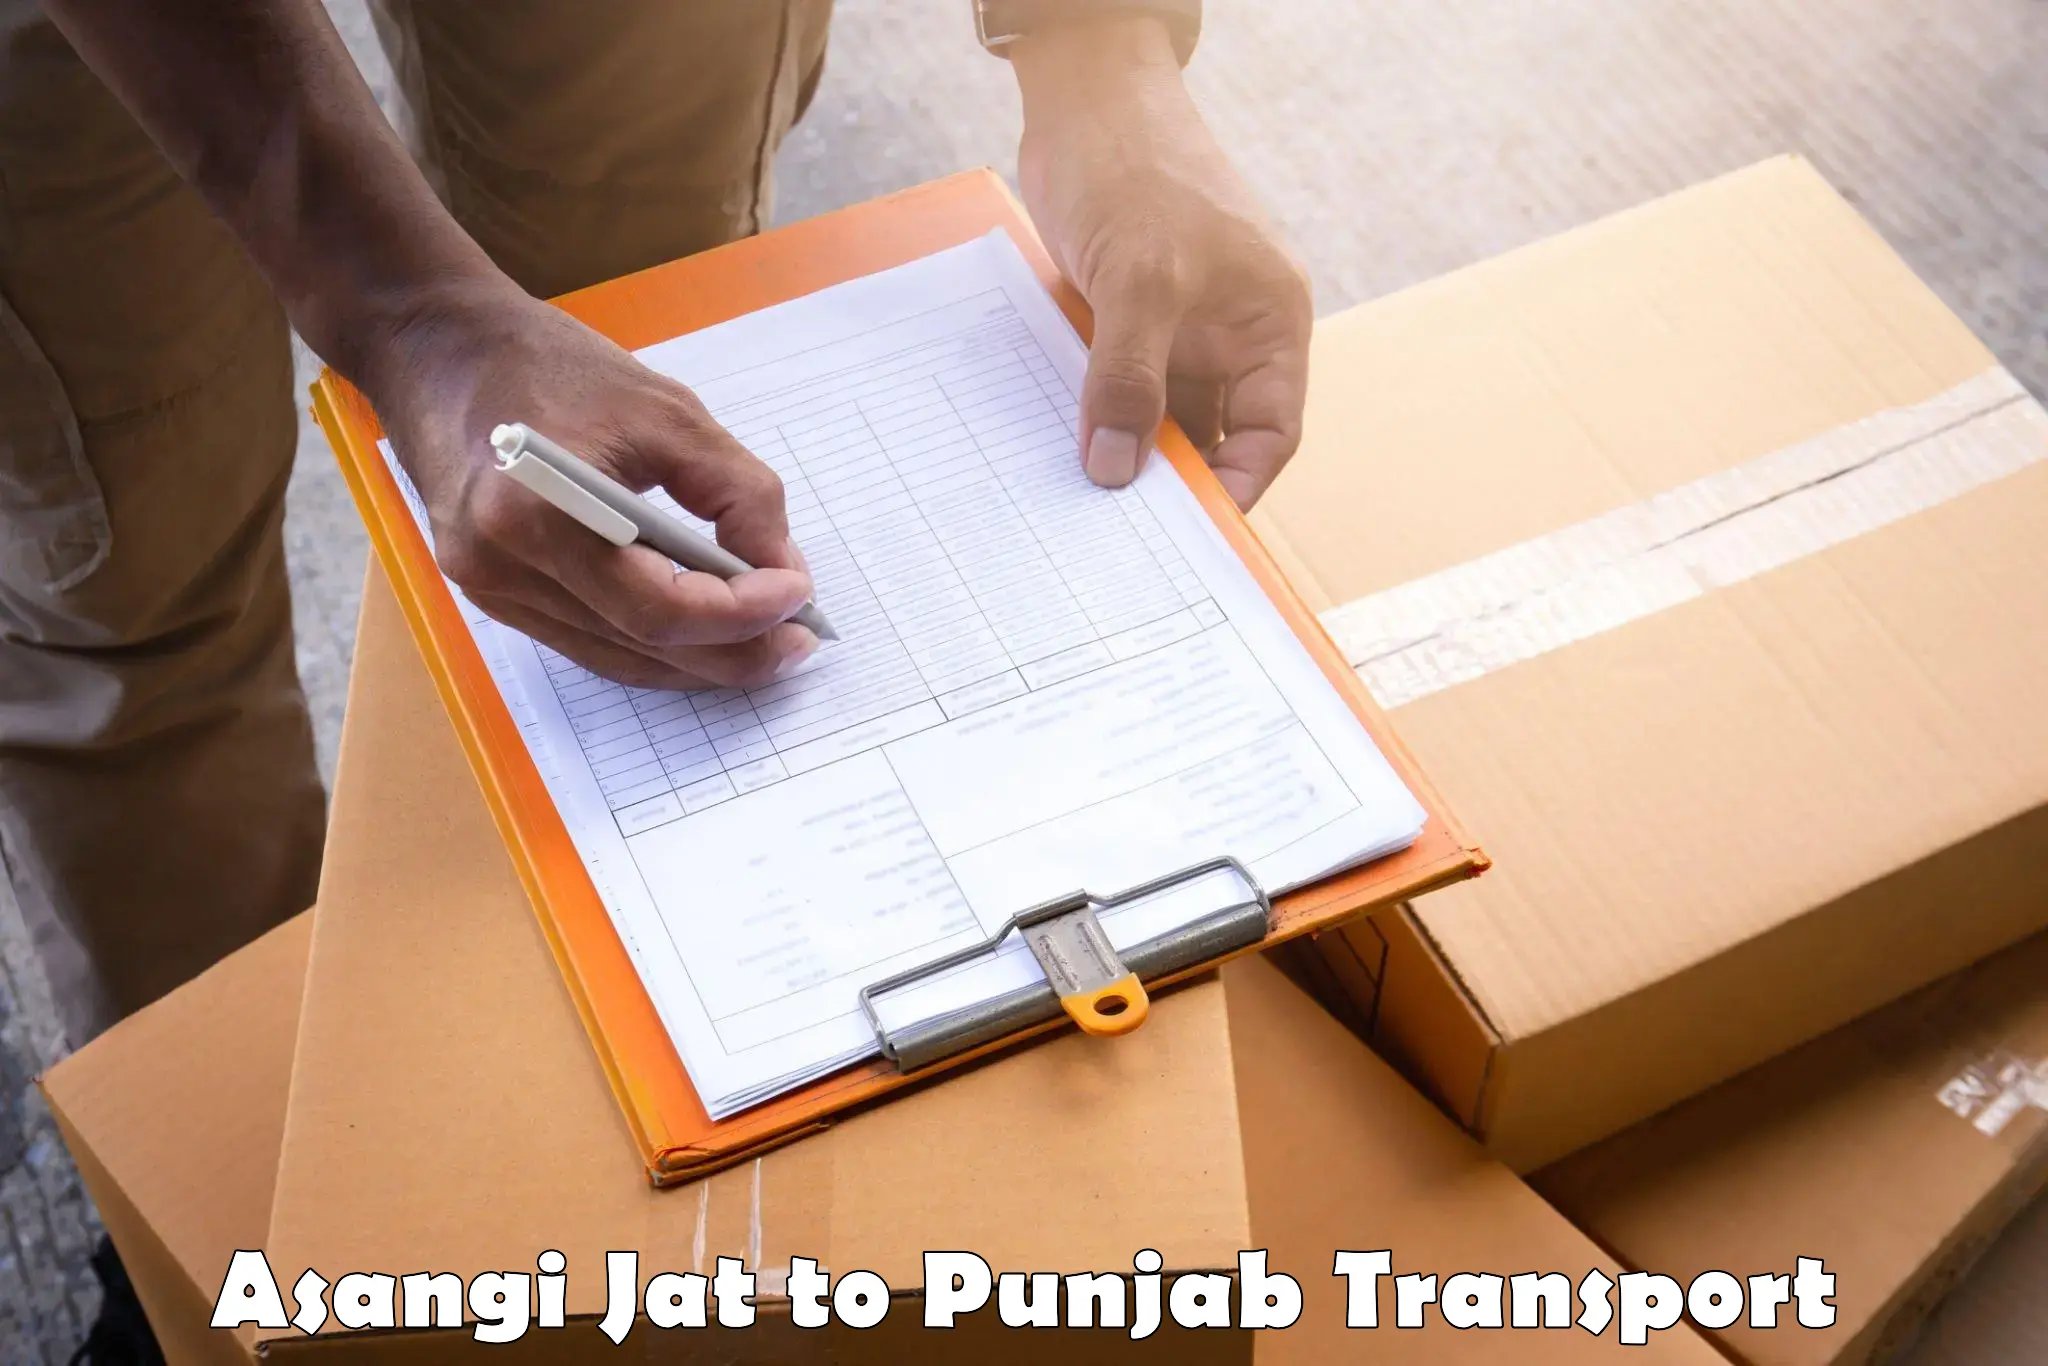 Transport bike from one state to another Asangi Jat to Patiala